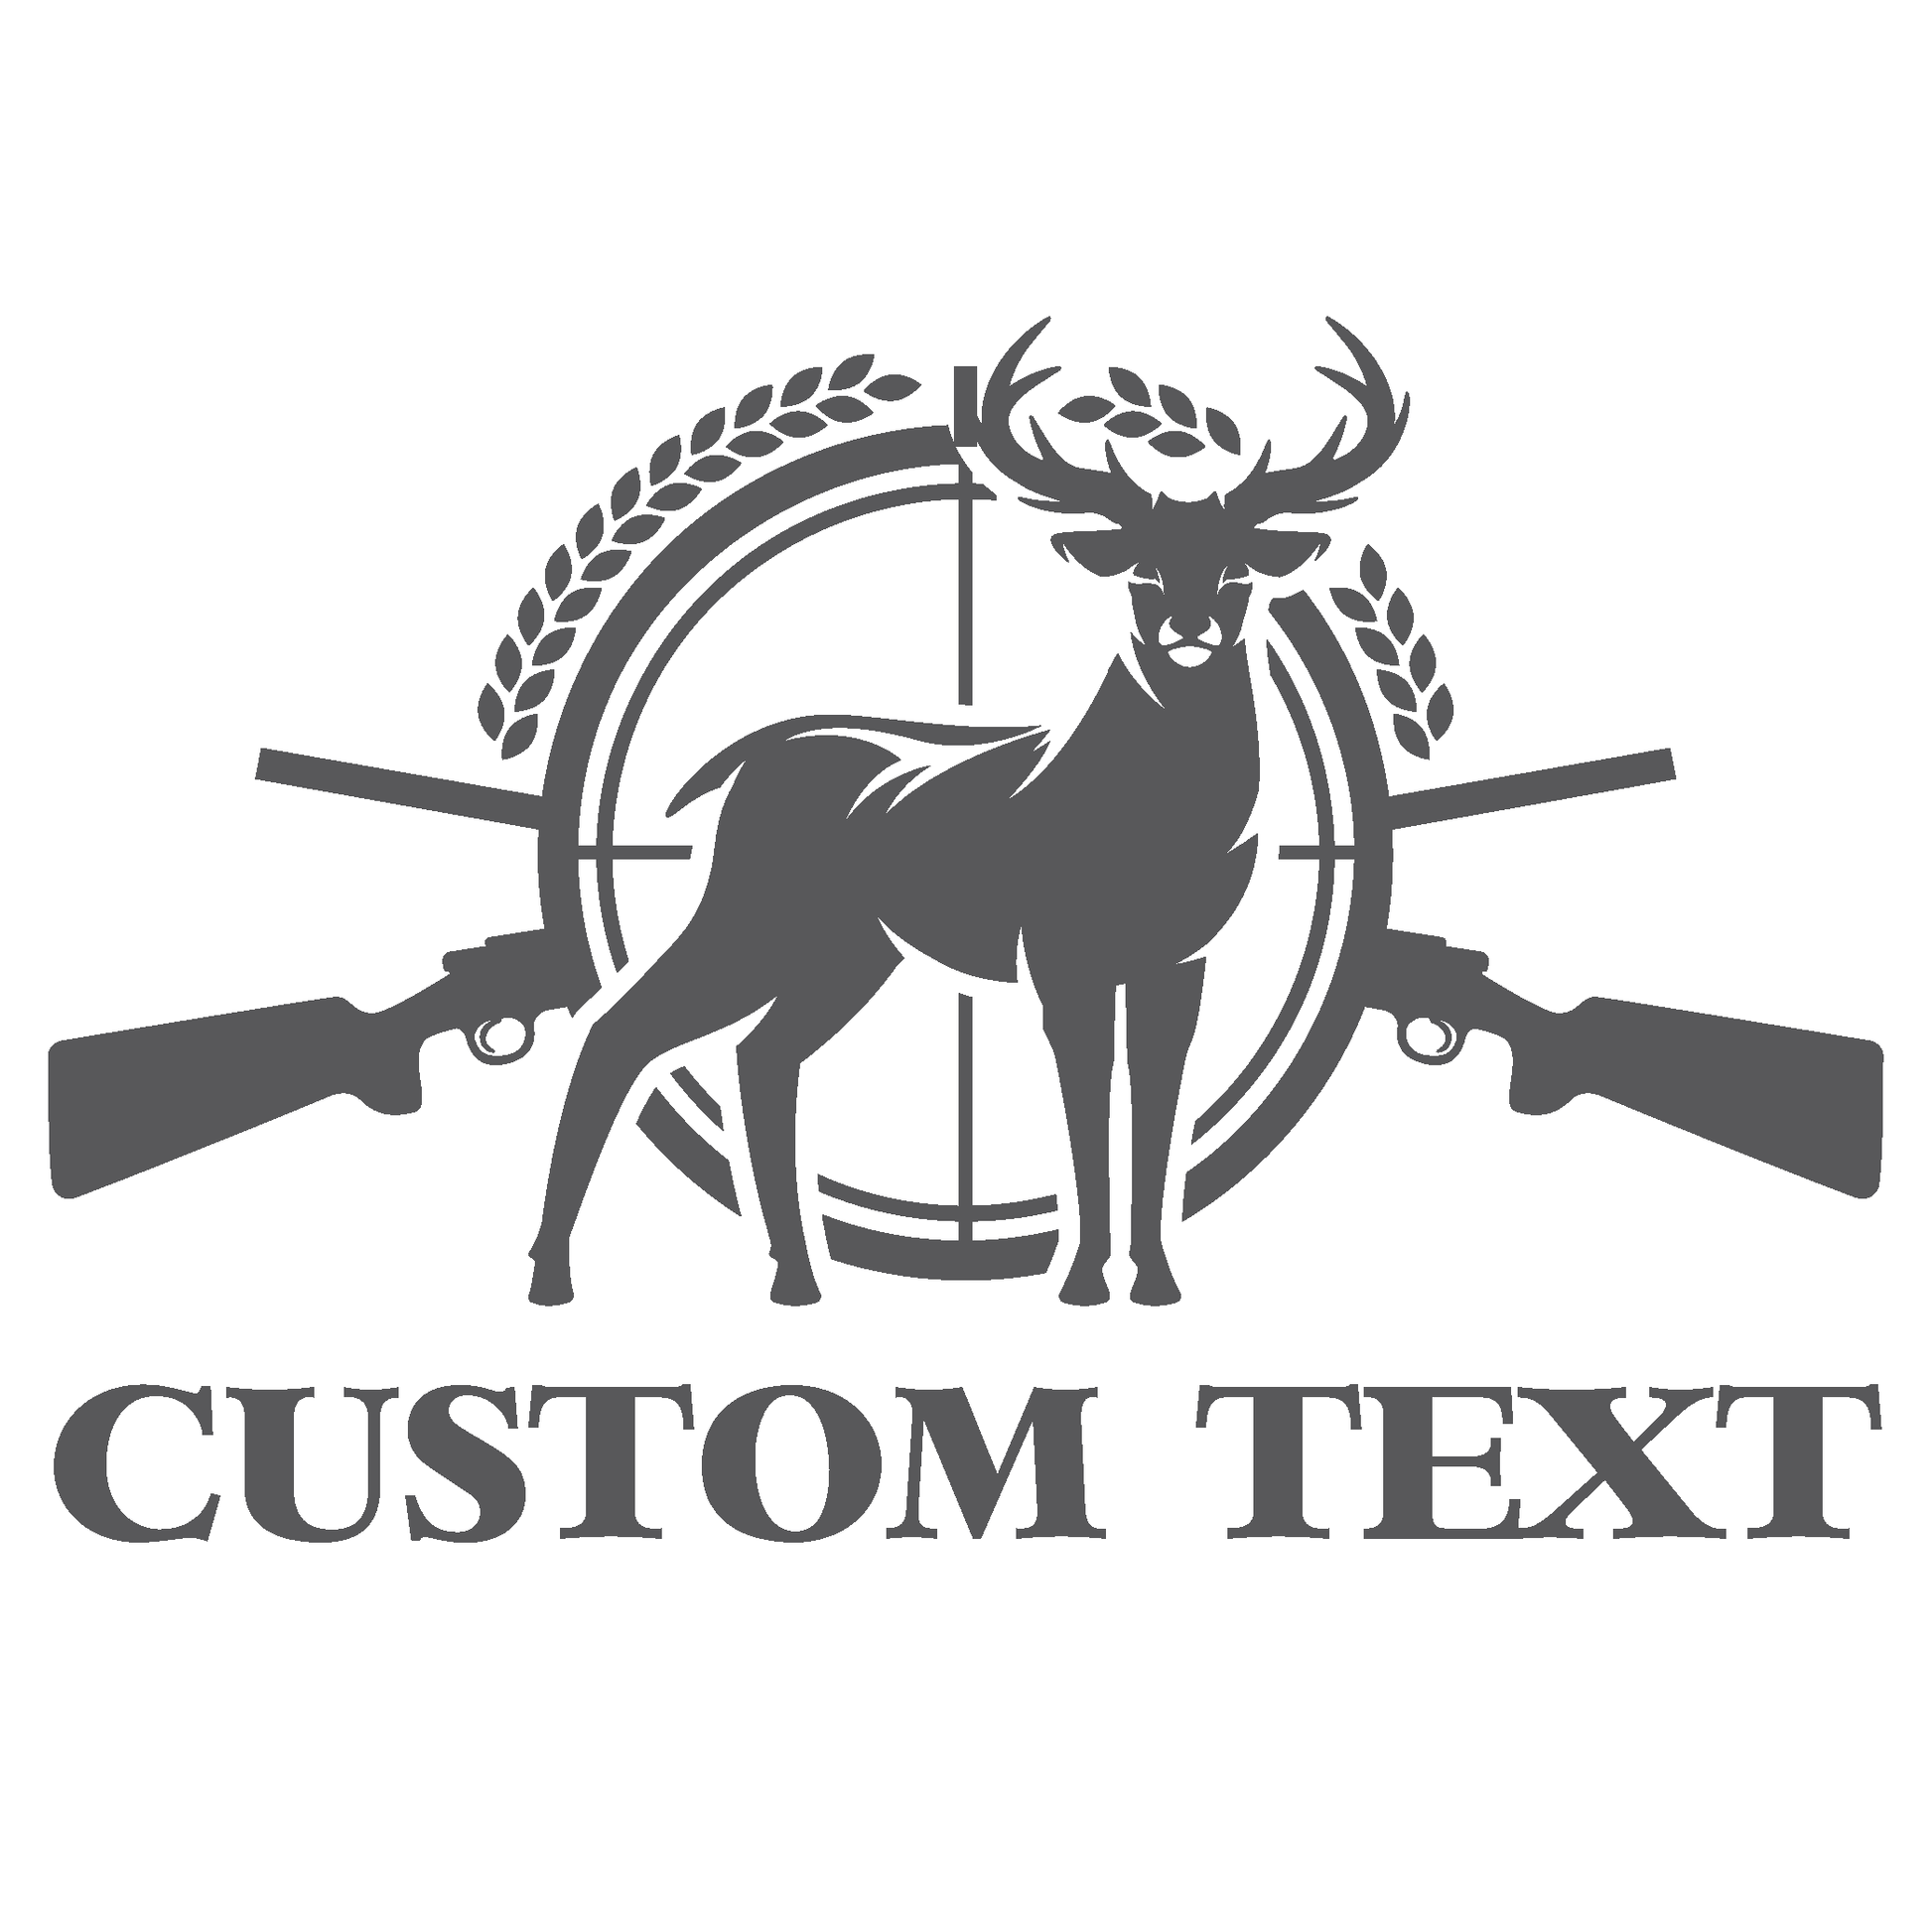 ShopVinylDesignStore.com CUSTOM TEXT with Buck and Guns for Corn Hole Boards Wide Style 25 Shop Vinyl Design decals stickers